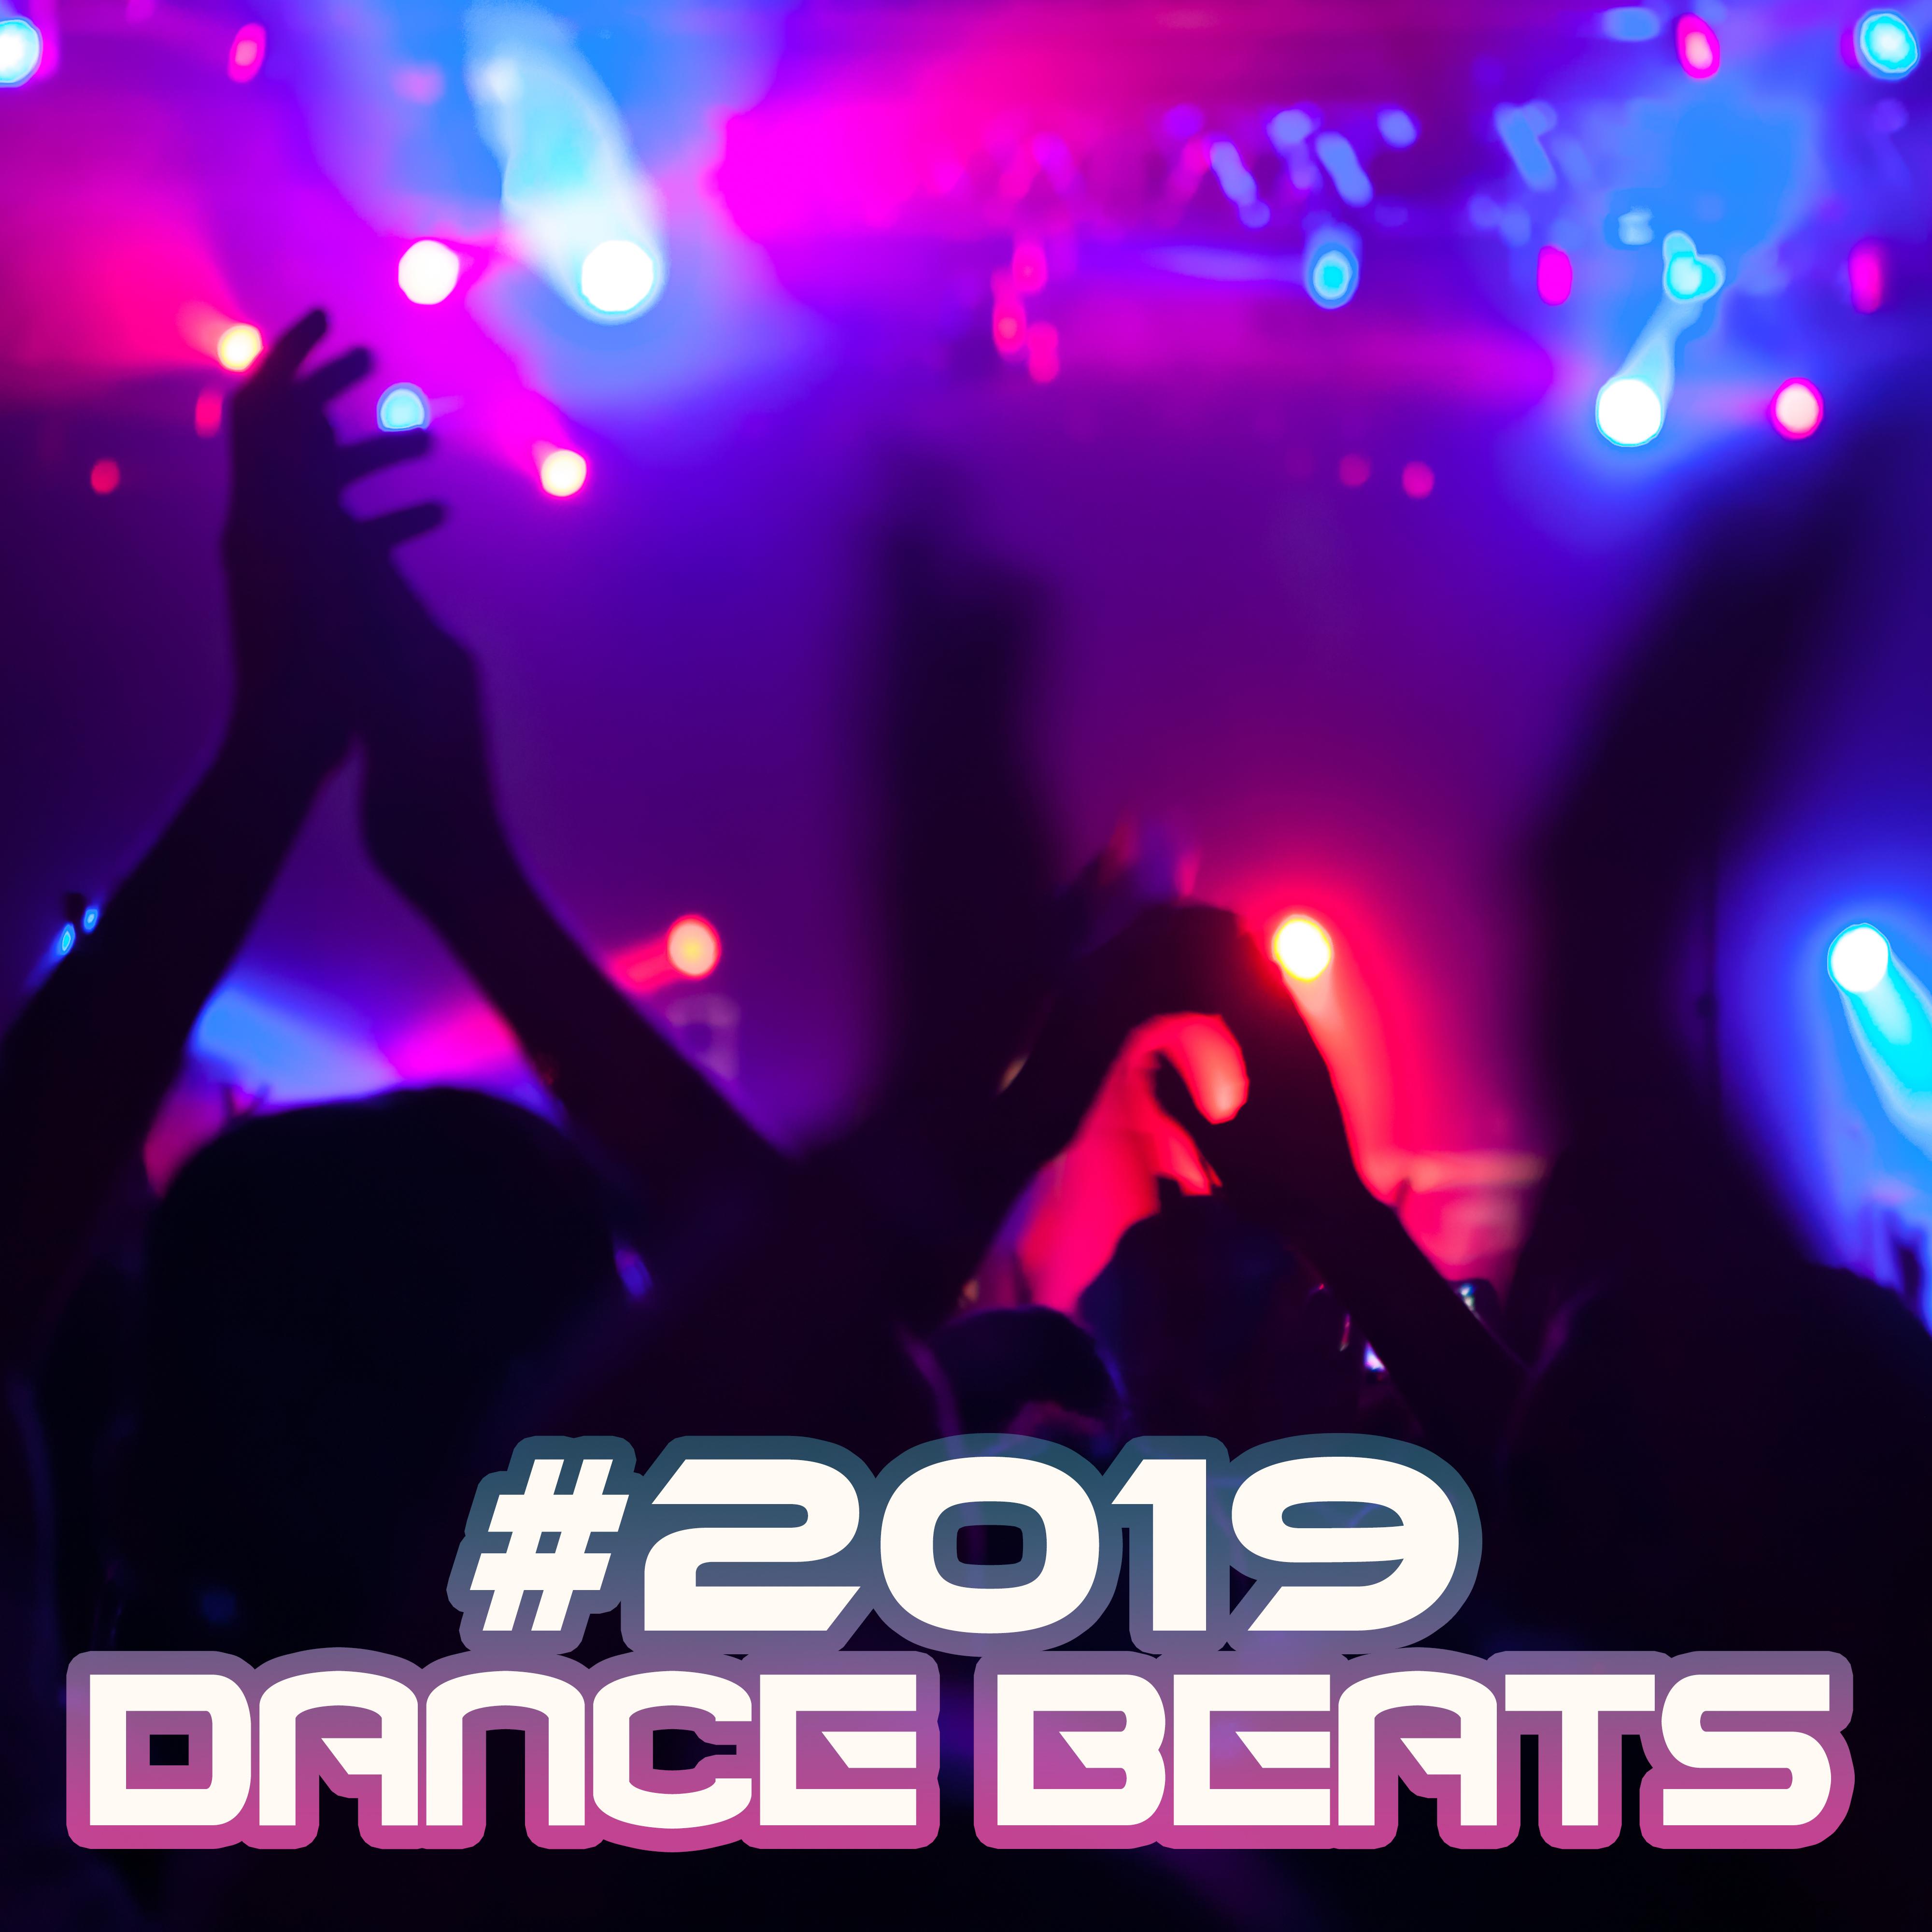 #2019 Dance Beats – Greatest House & Trance Music for Parties, Dancing and Epic Fun Until Dawn